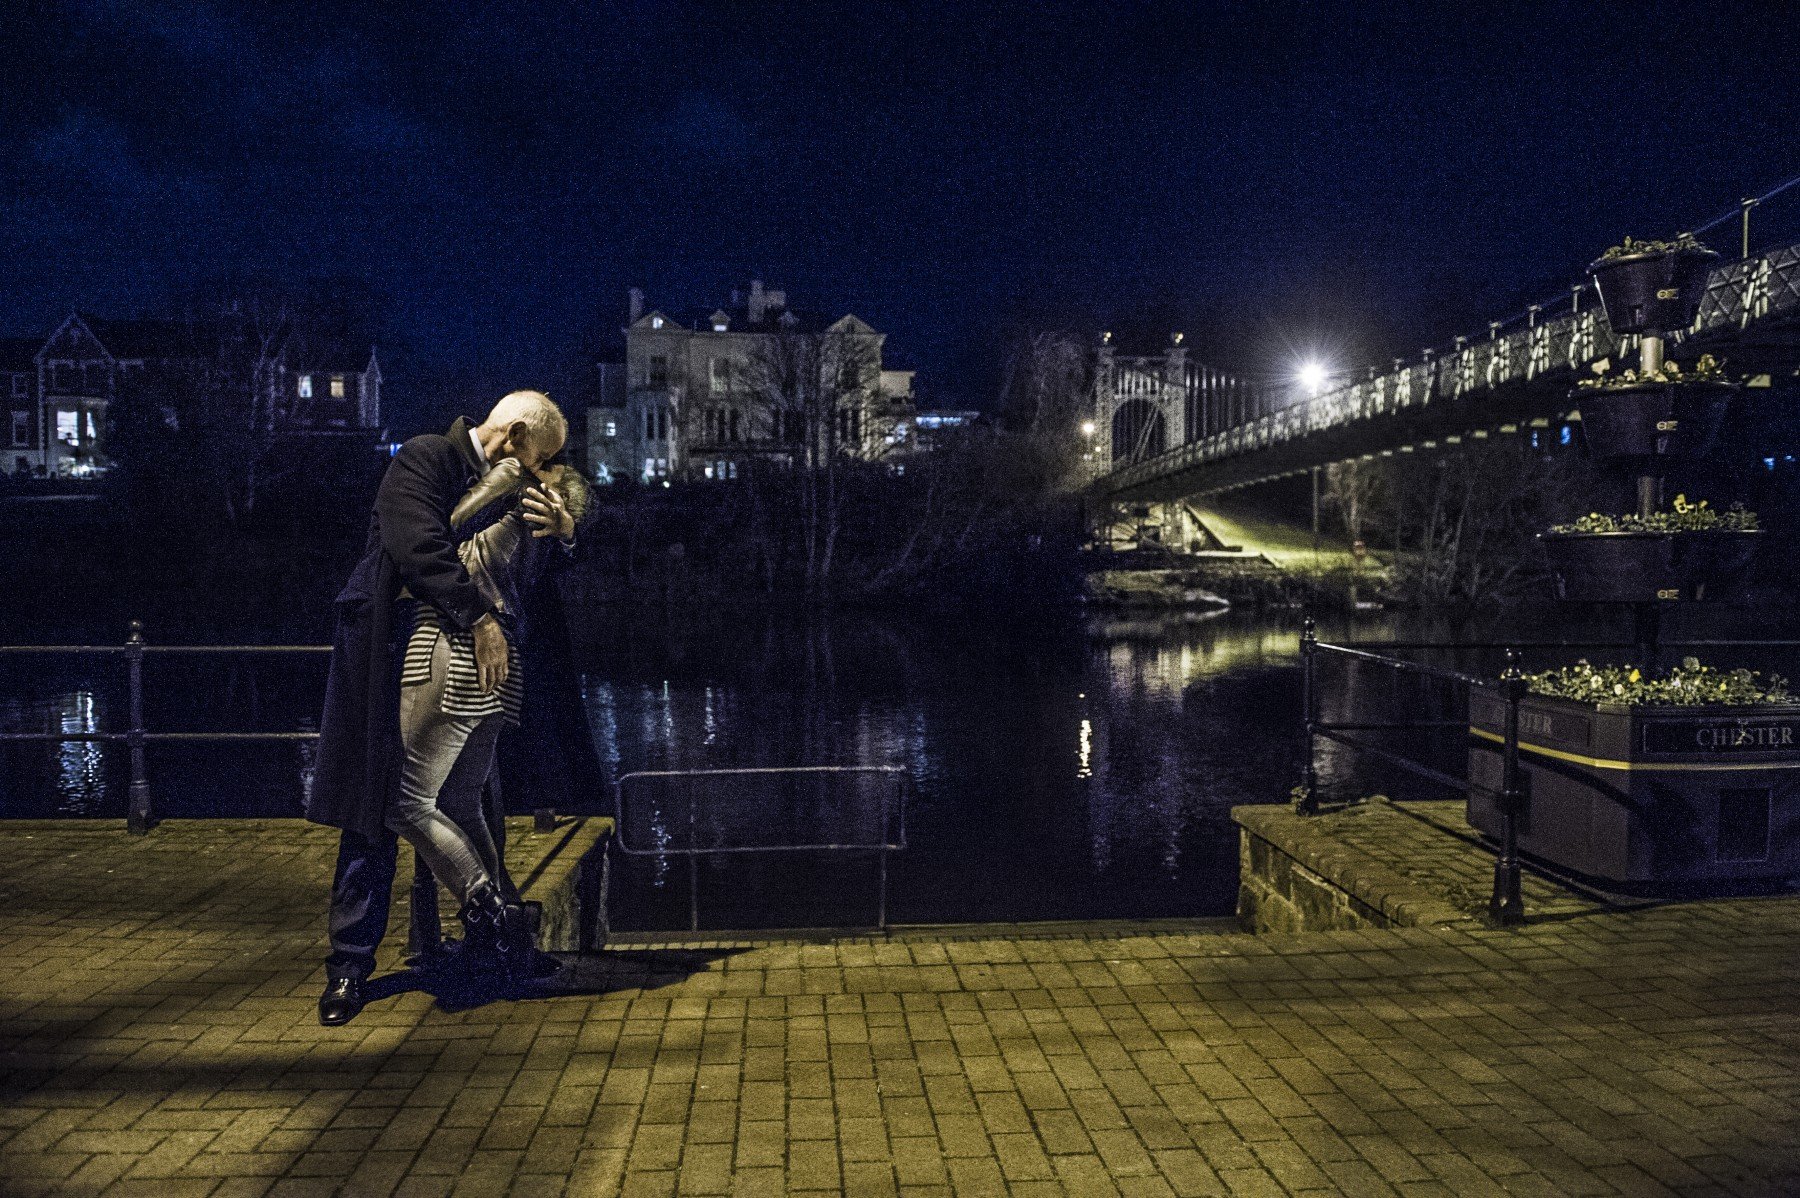 Man and woman kissing at night by the river